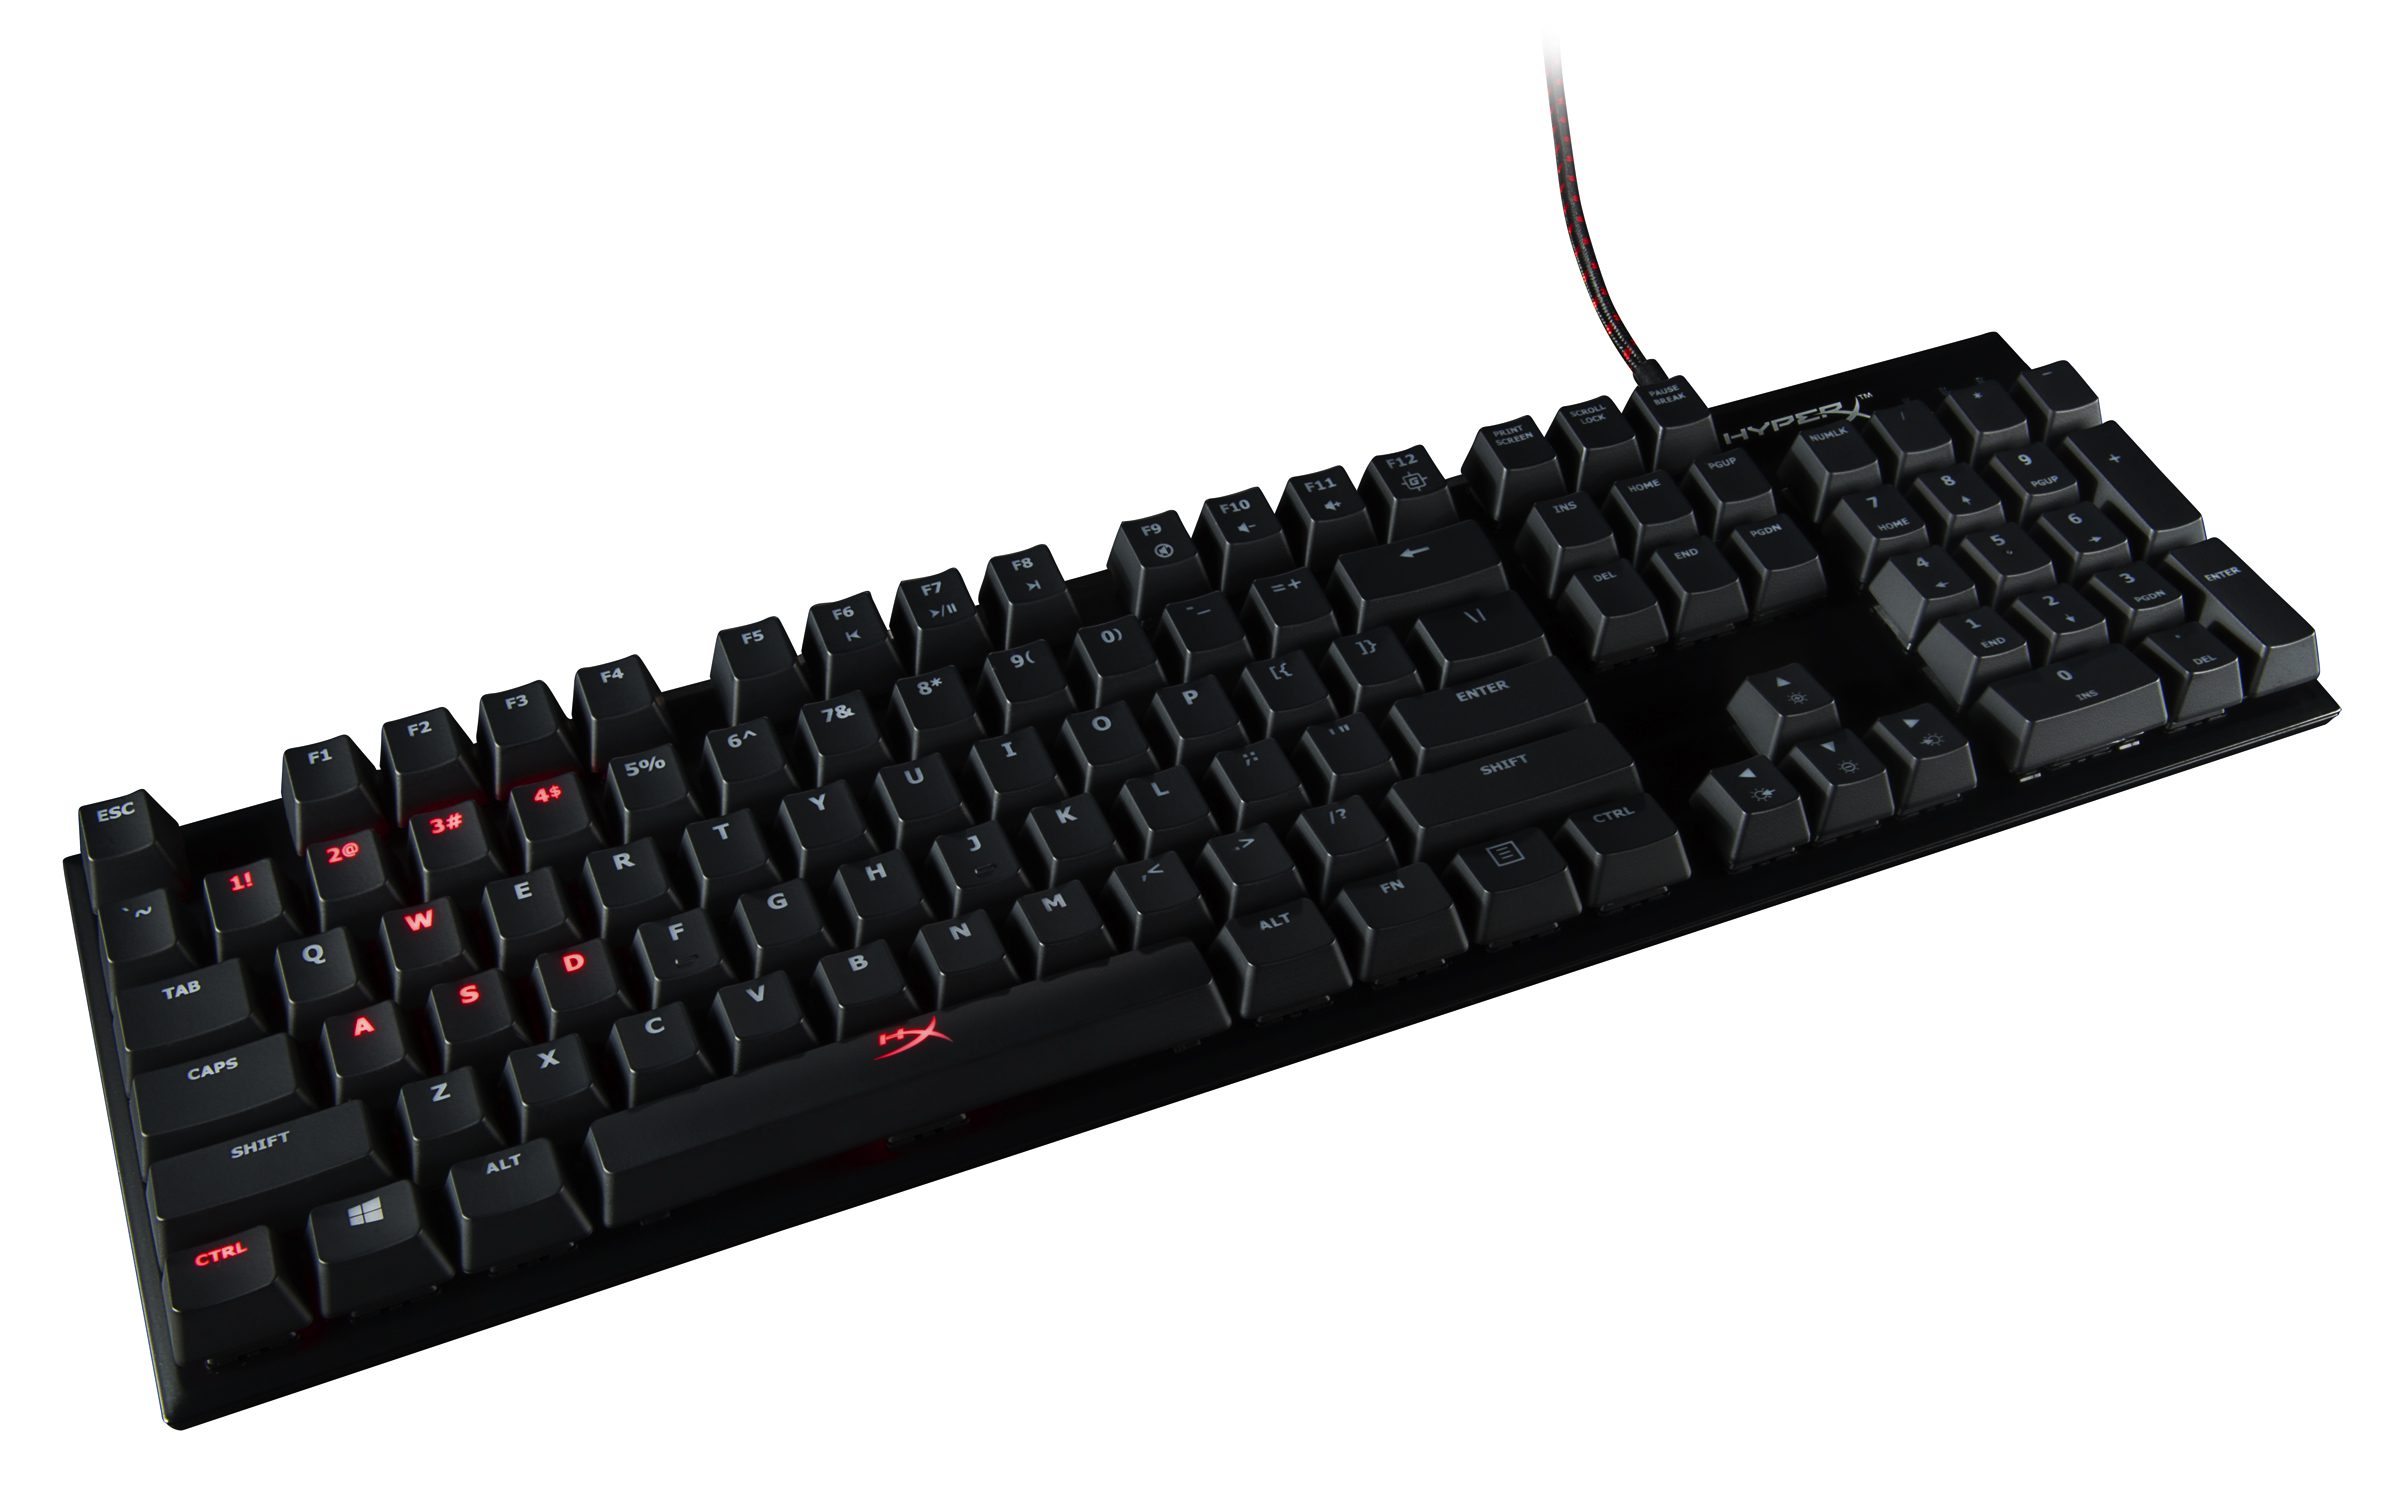 HyperX ALLOY FPSGaming Keyboard Launched in India for INR 8,999/-